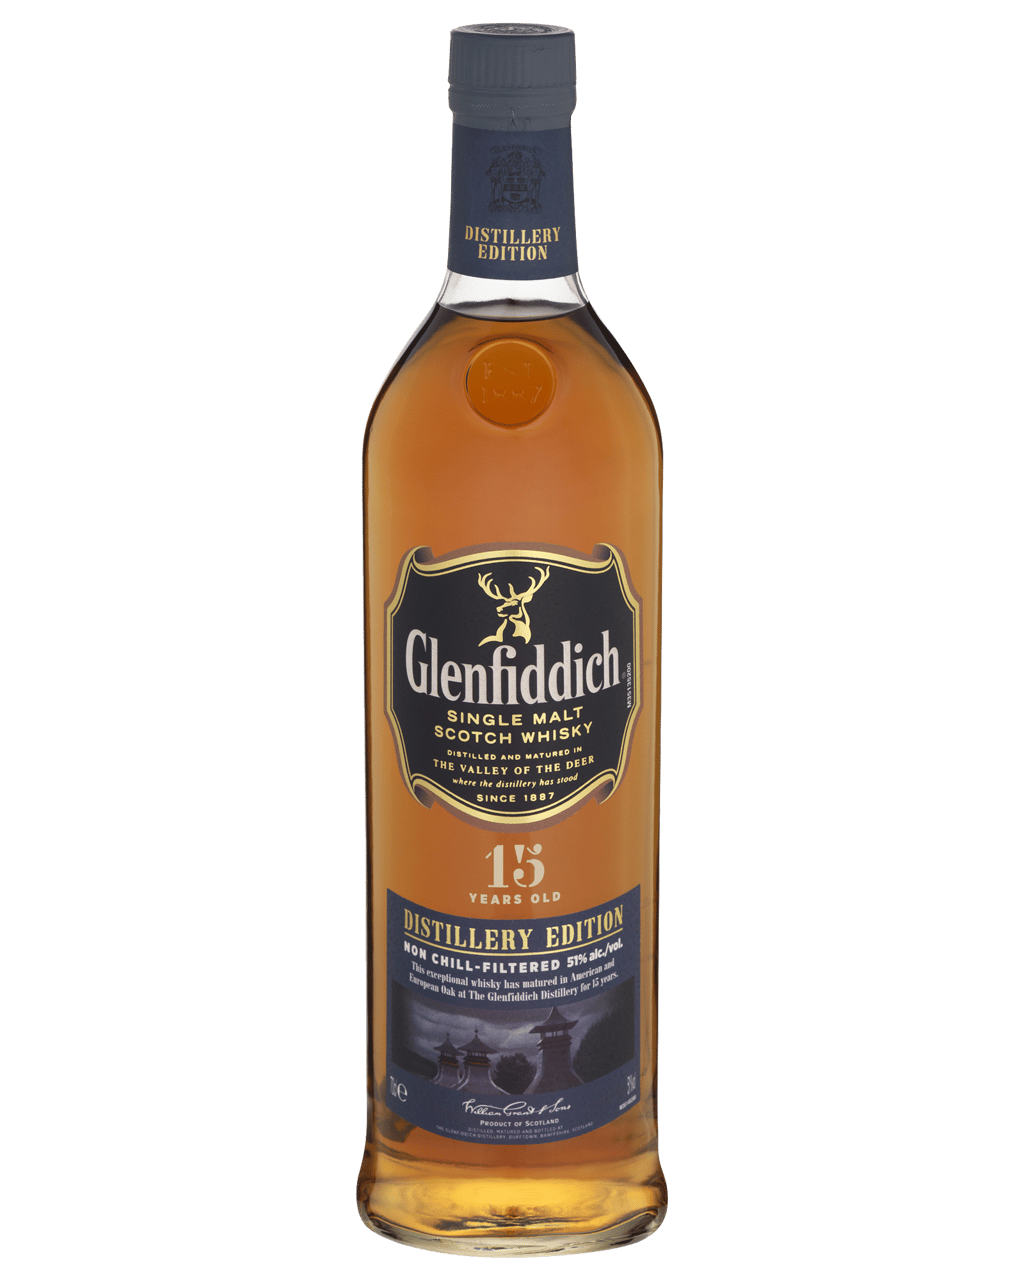 Glenfiddich takes signature 18-Year-Old expression to the next level